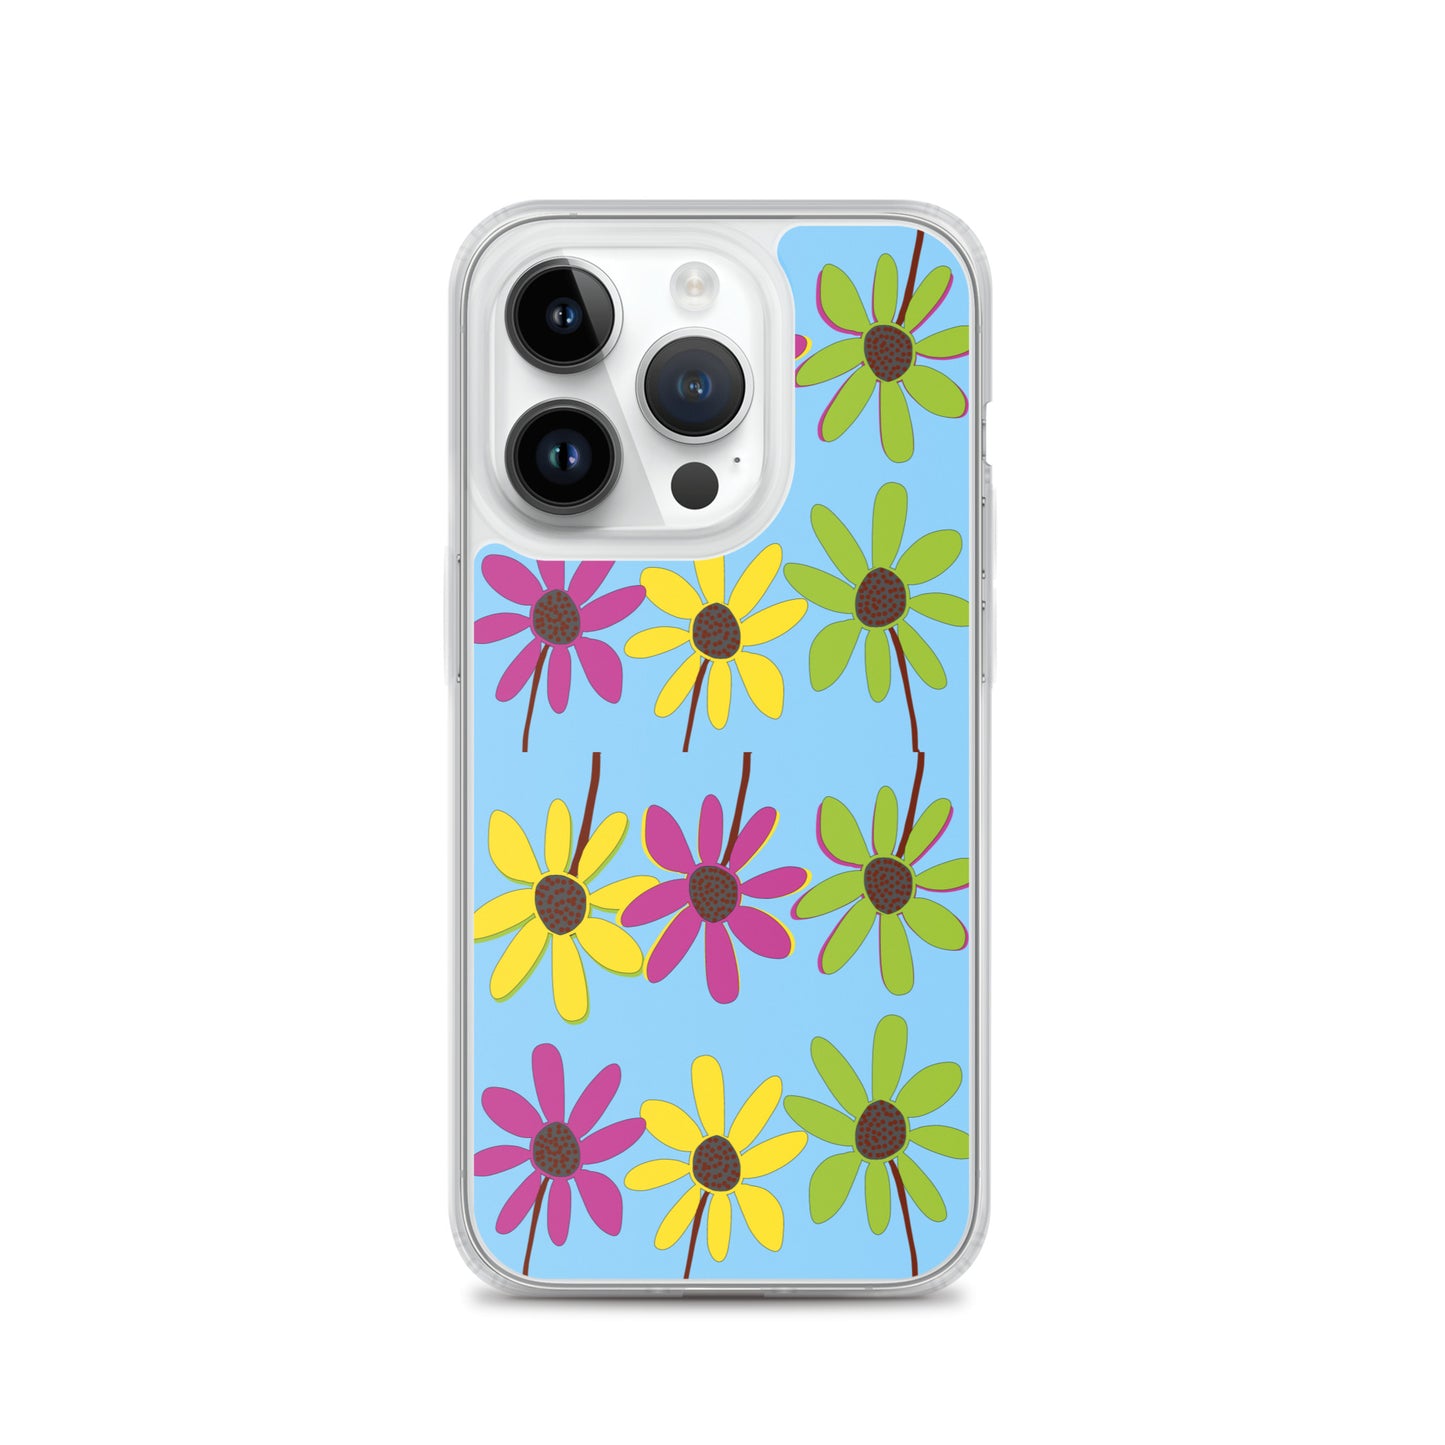 iPhone Colourful Hand Drawn Flower Petals Sky Blue Case